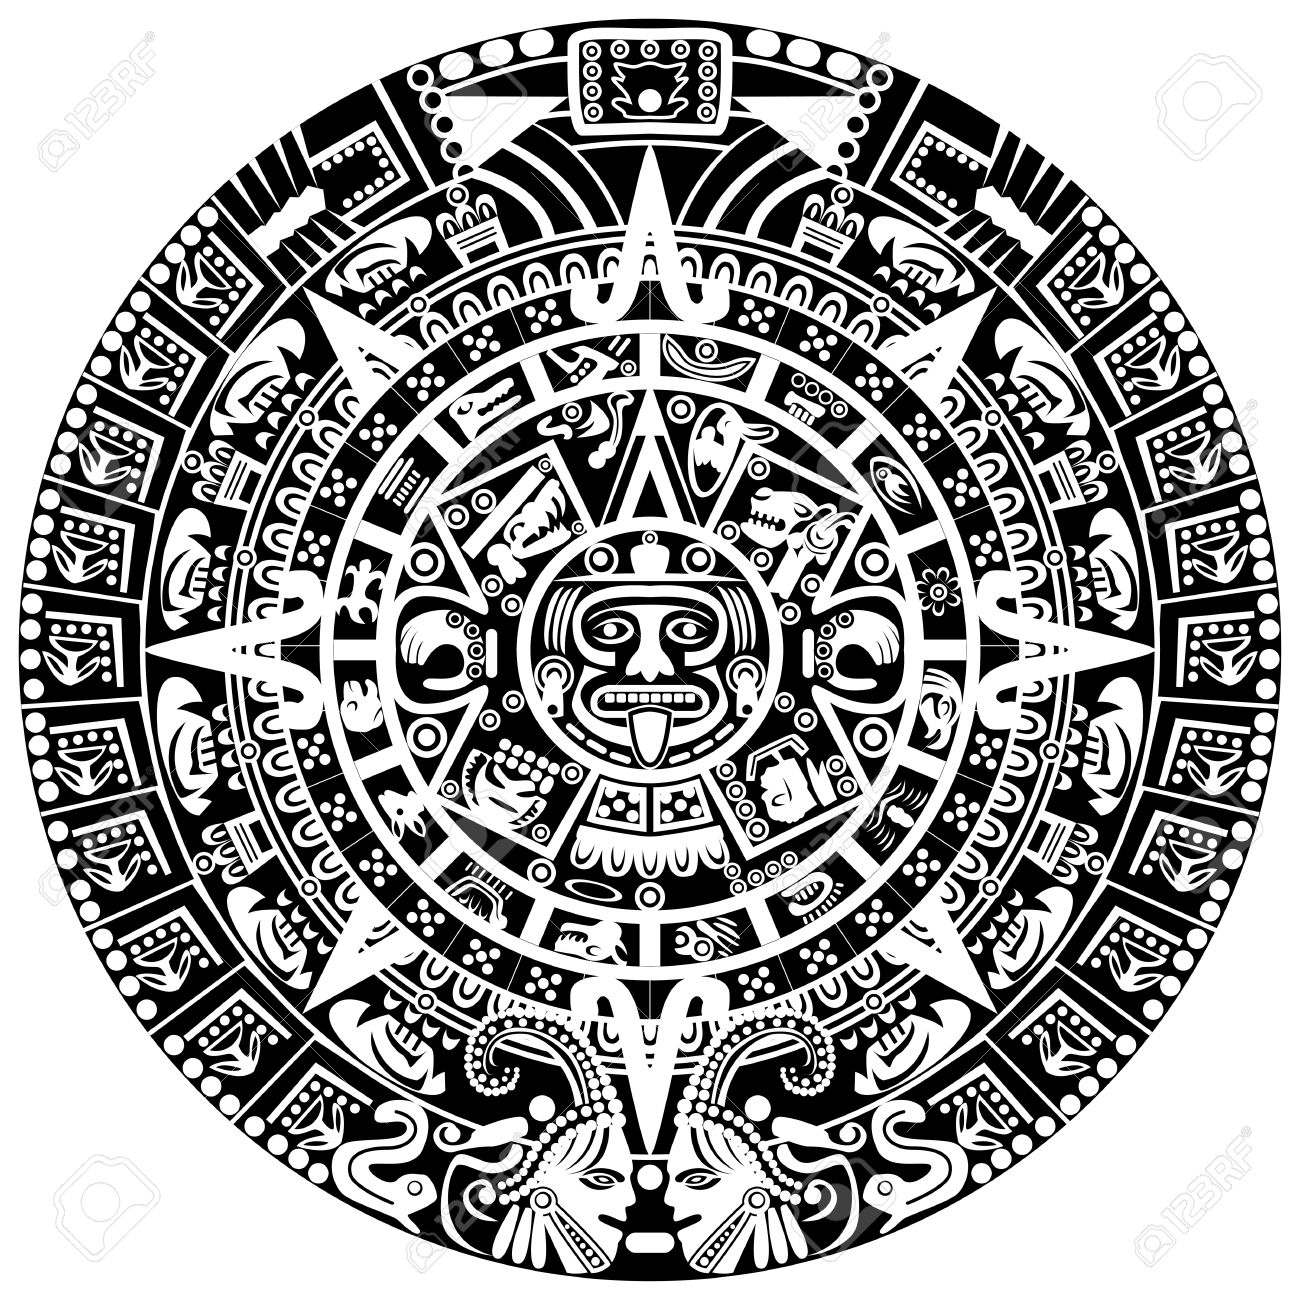 Mayan Calendar On White Background Royalty Free Cliparts, Vectors with regard to Versions Of The Mayan Calendar